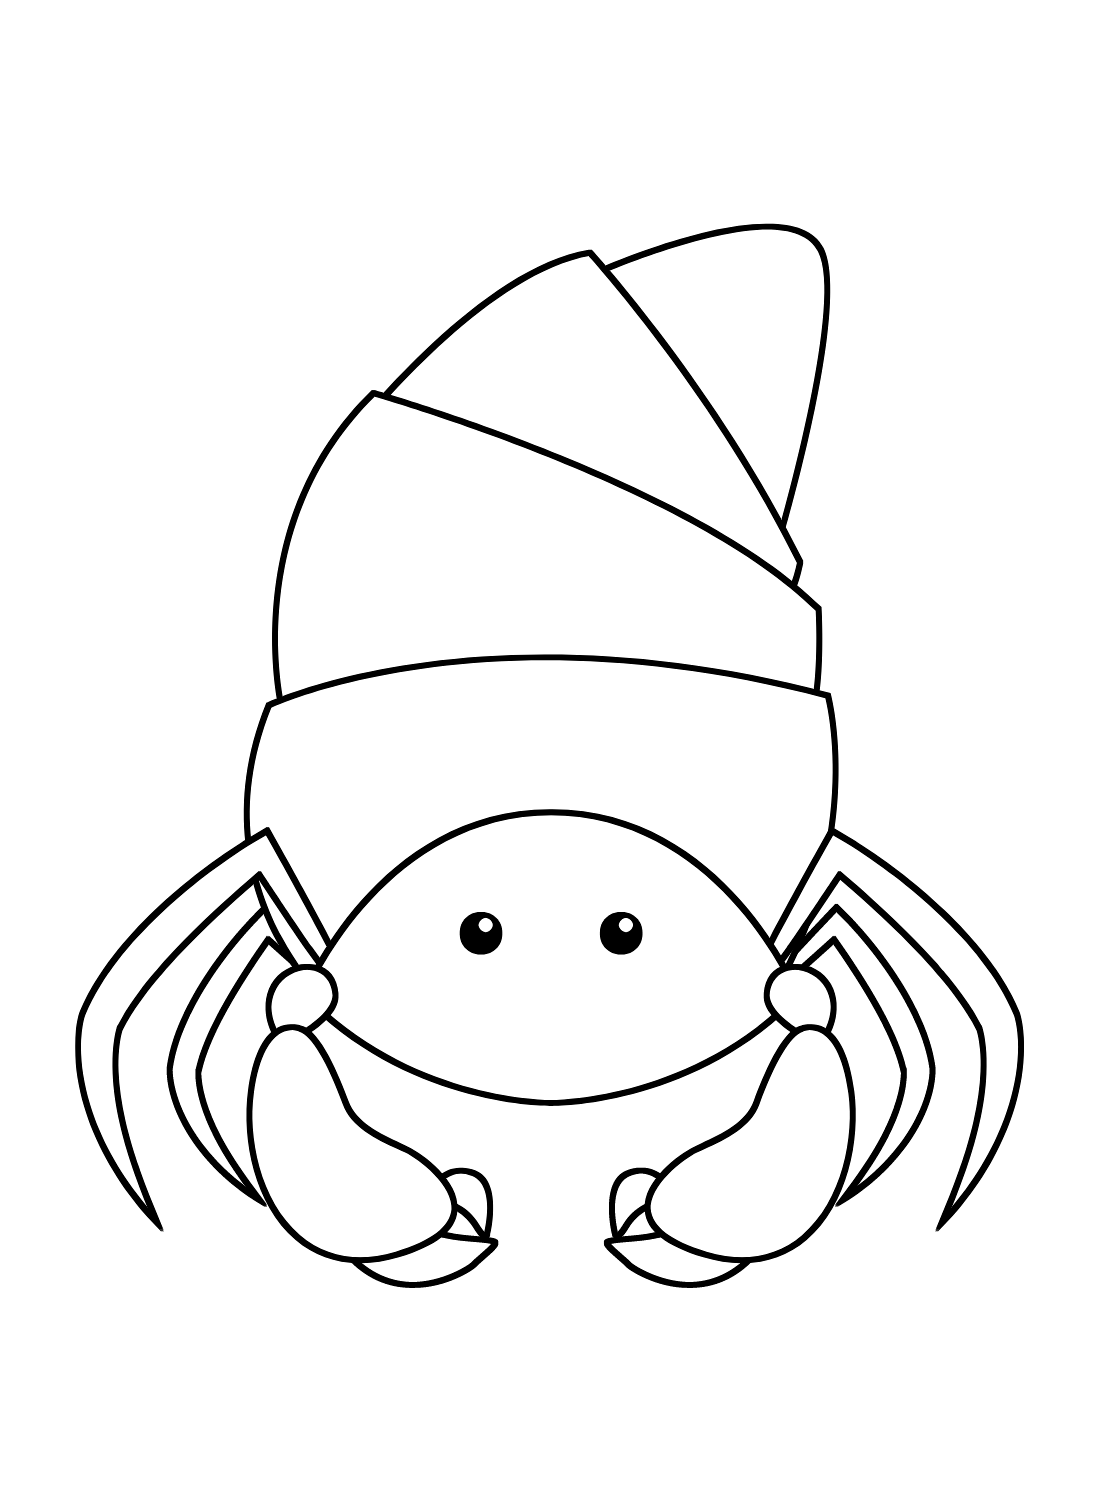 Hermit Crab Simple from Hermit Crab